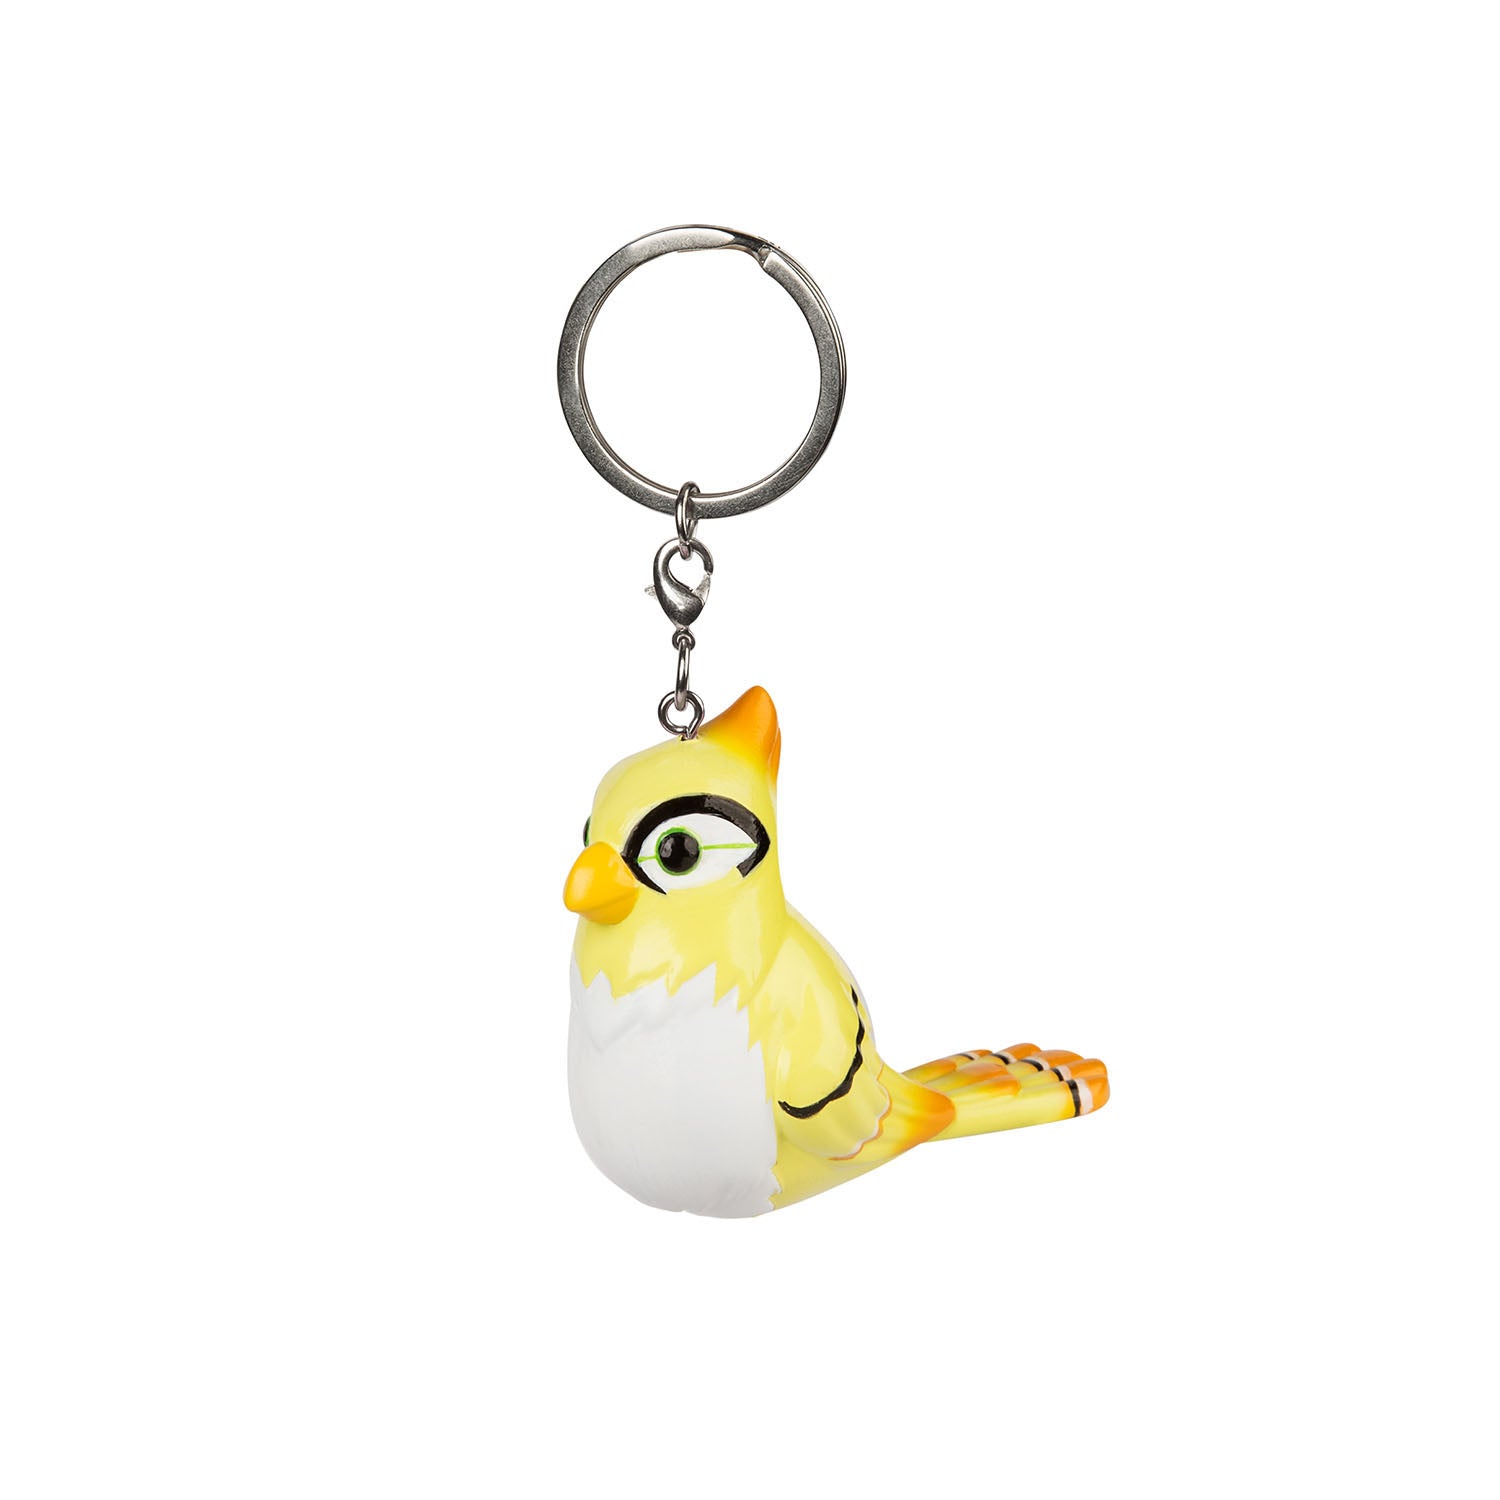 Overwatch Ganymede J!NX 3D Keyring in Yellow - Left View